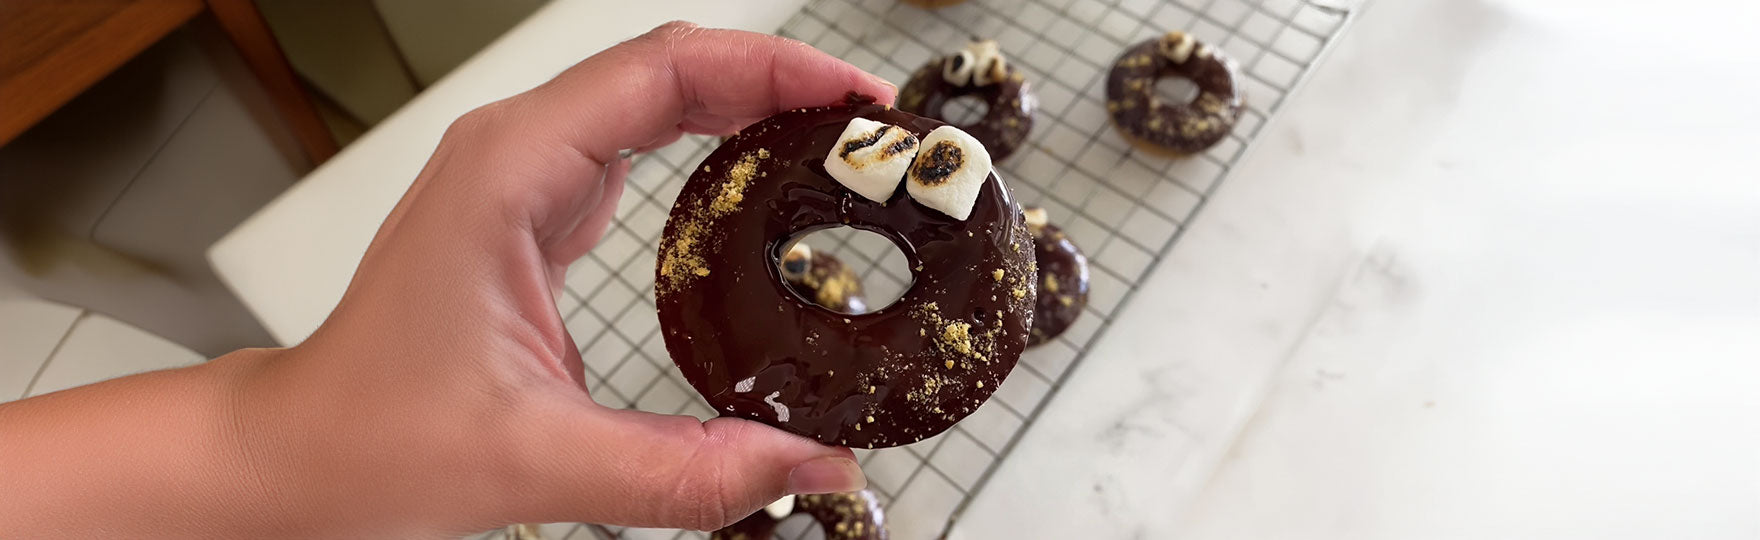 S’mores Donuts